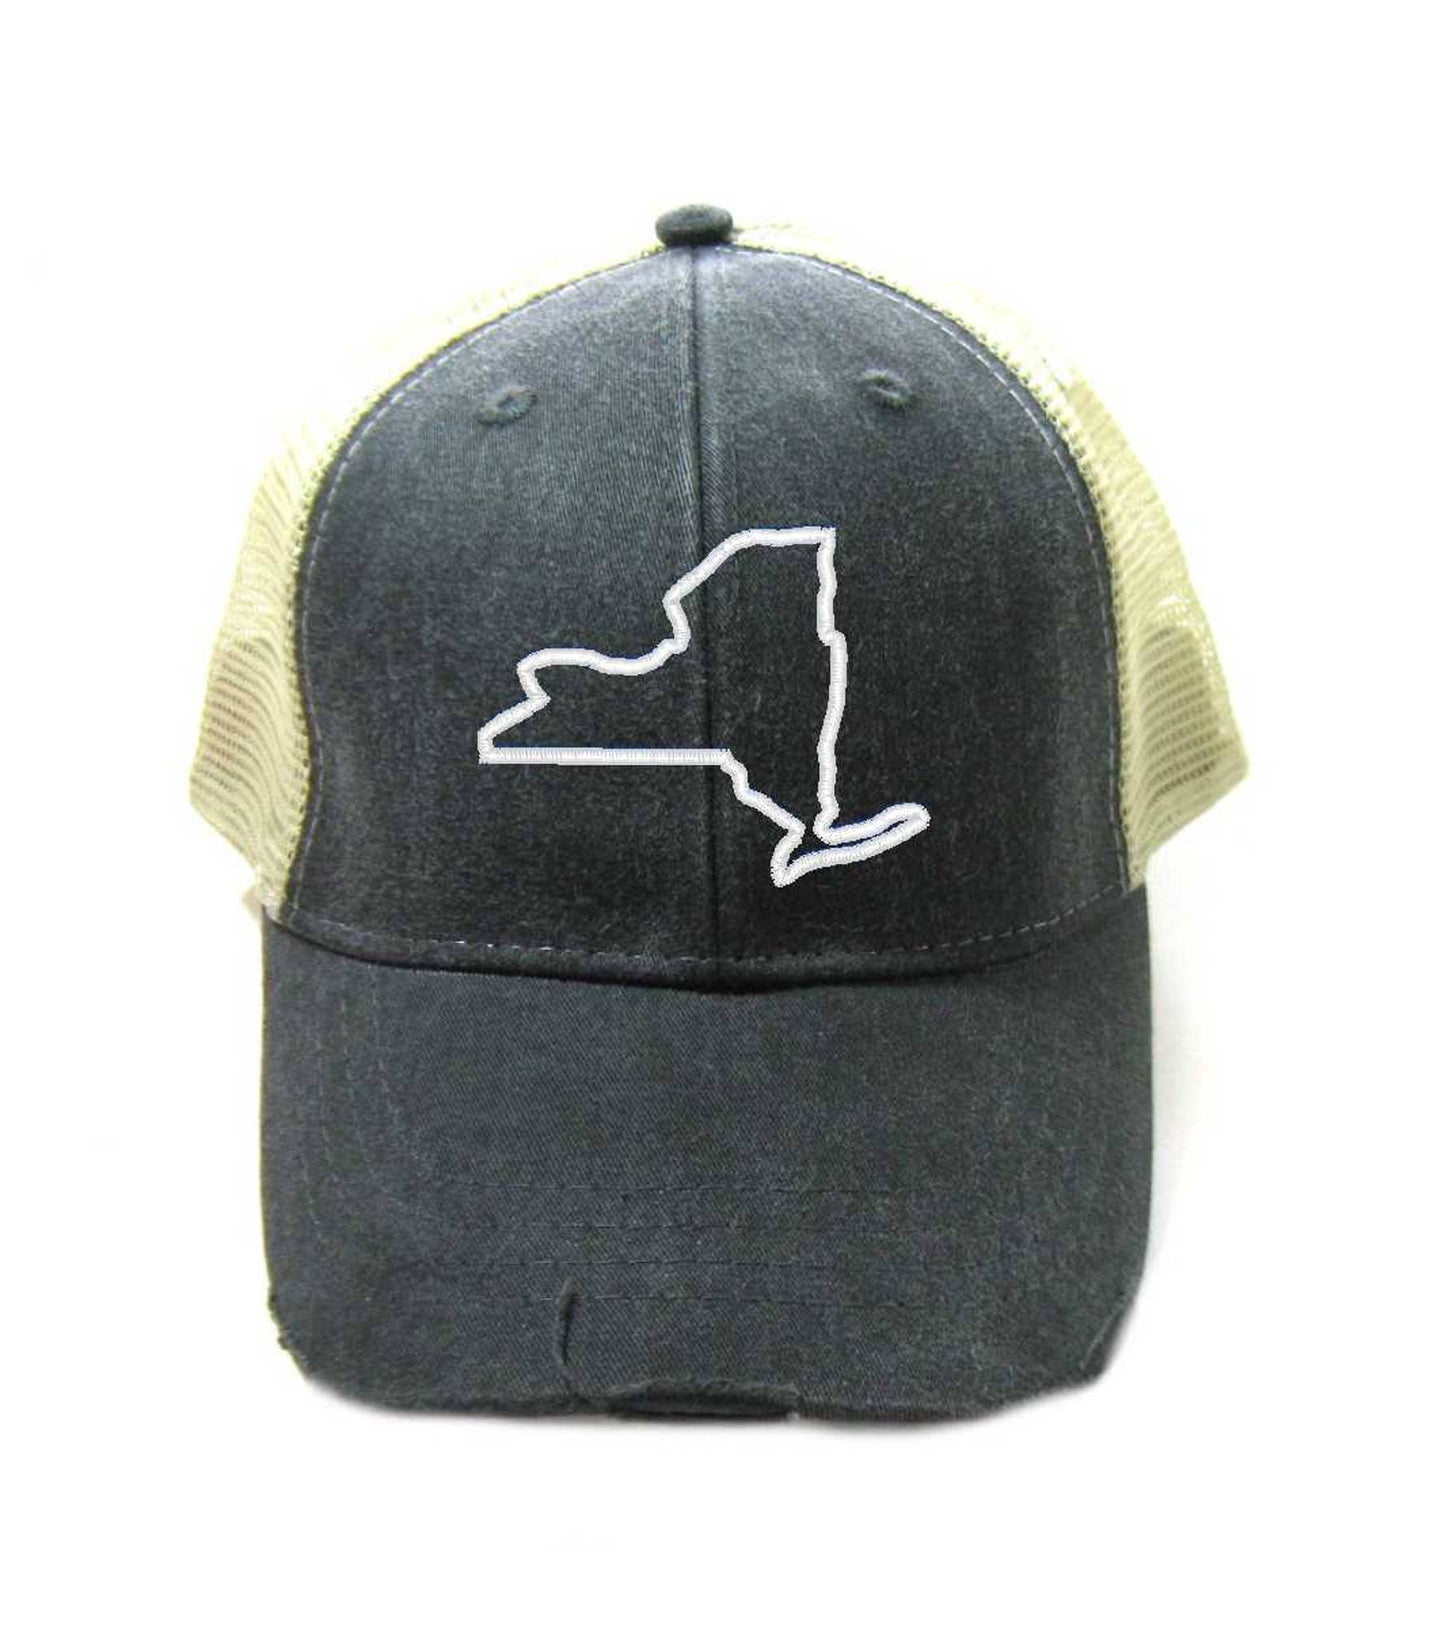 New York Hat - Distressed Snapback Trucker Hat - New York State Outline - Many Colors Available